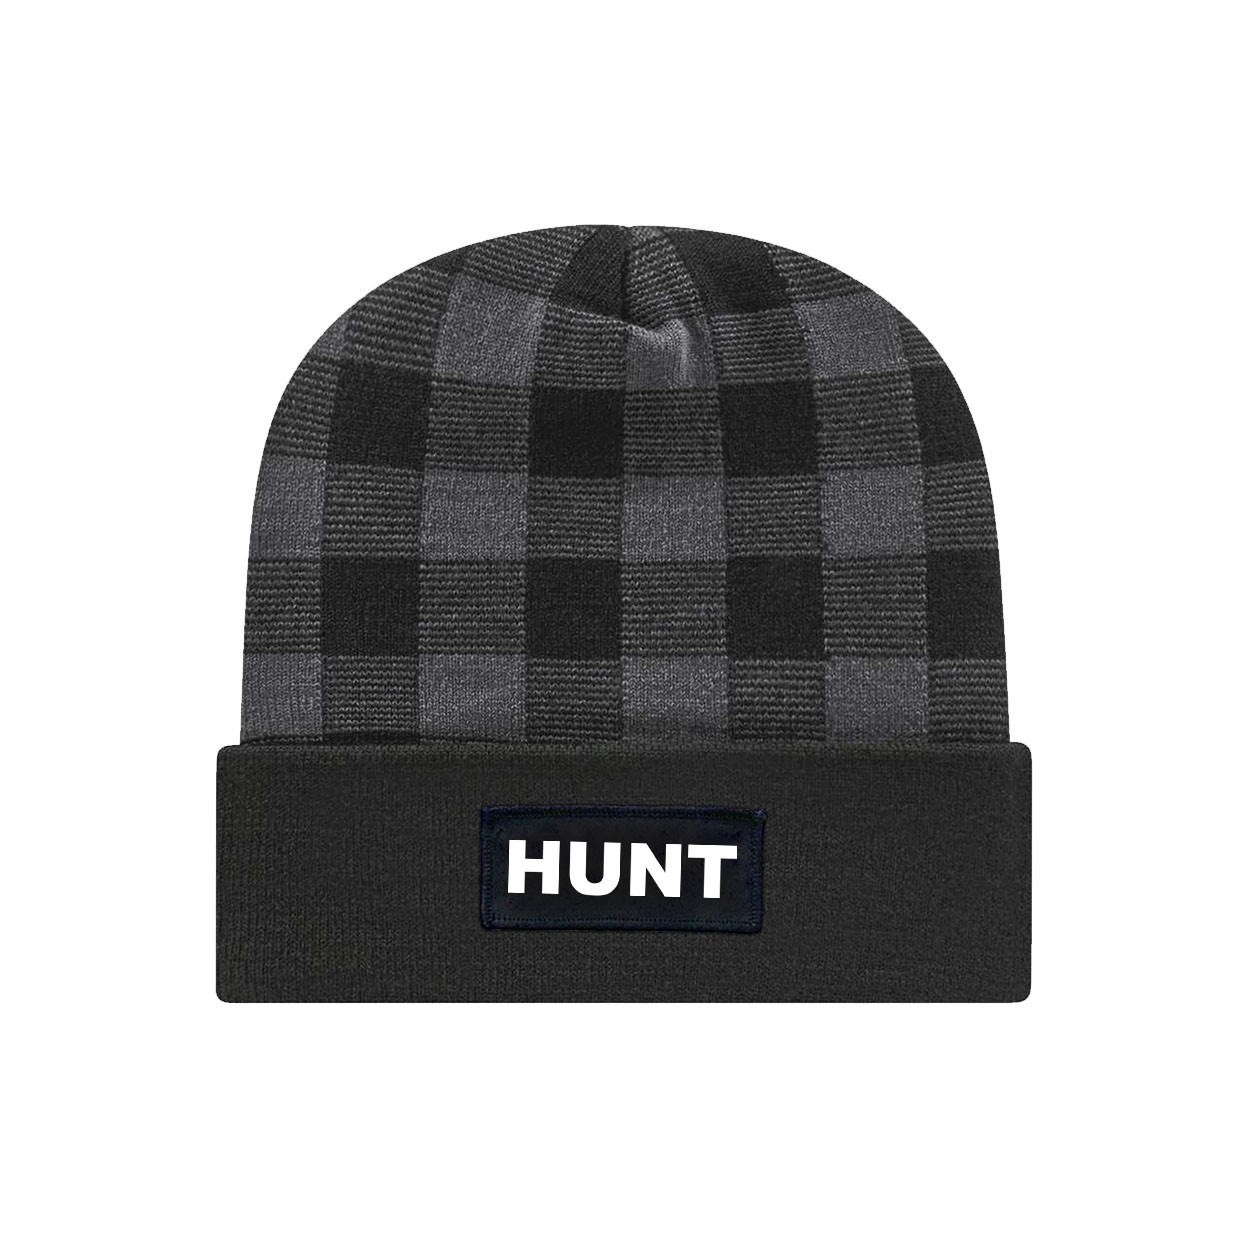 Hunt Brand Logo Night Out Woven Patch Roll Up Plaid Beanie Black/Heather Gray (White Logo)